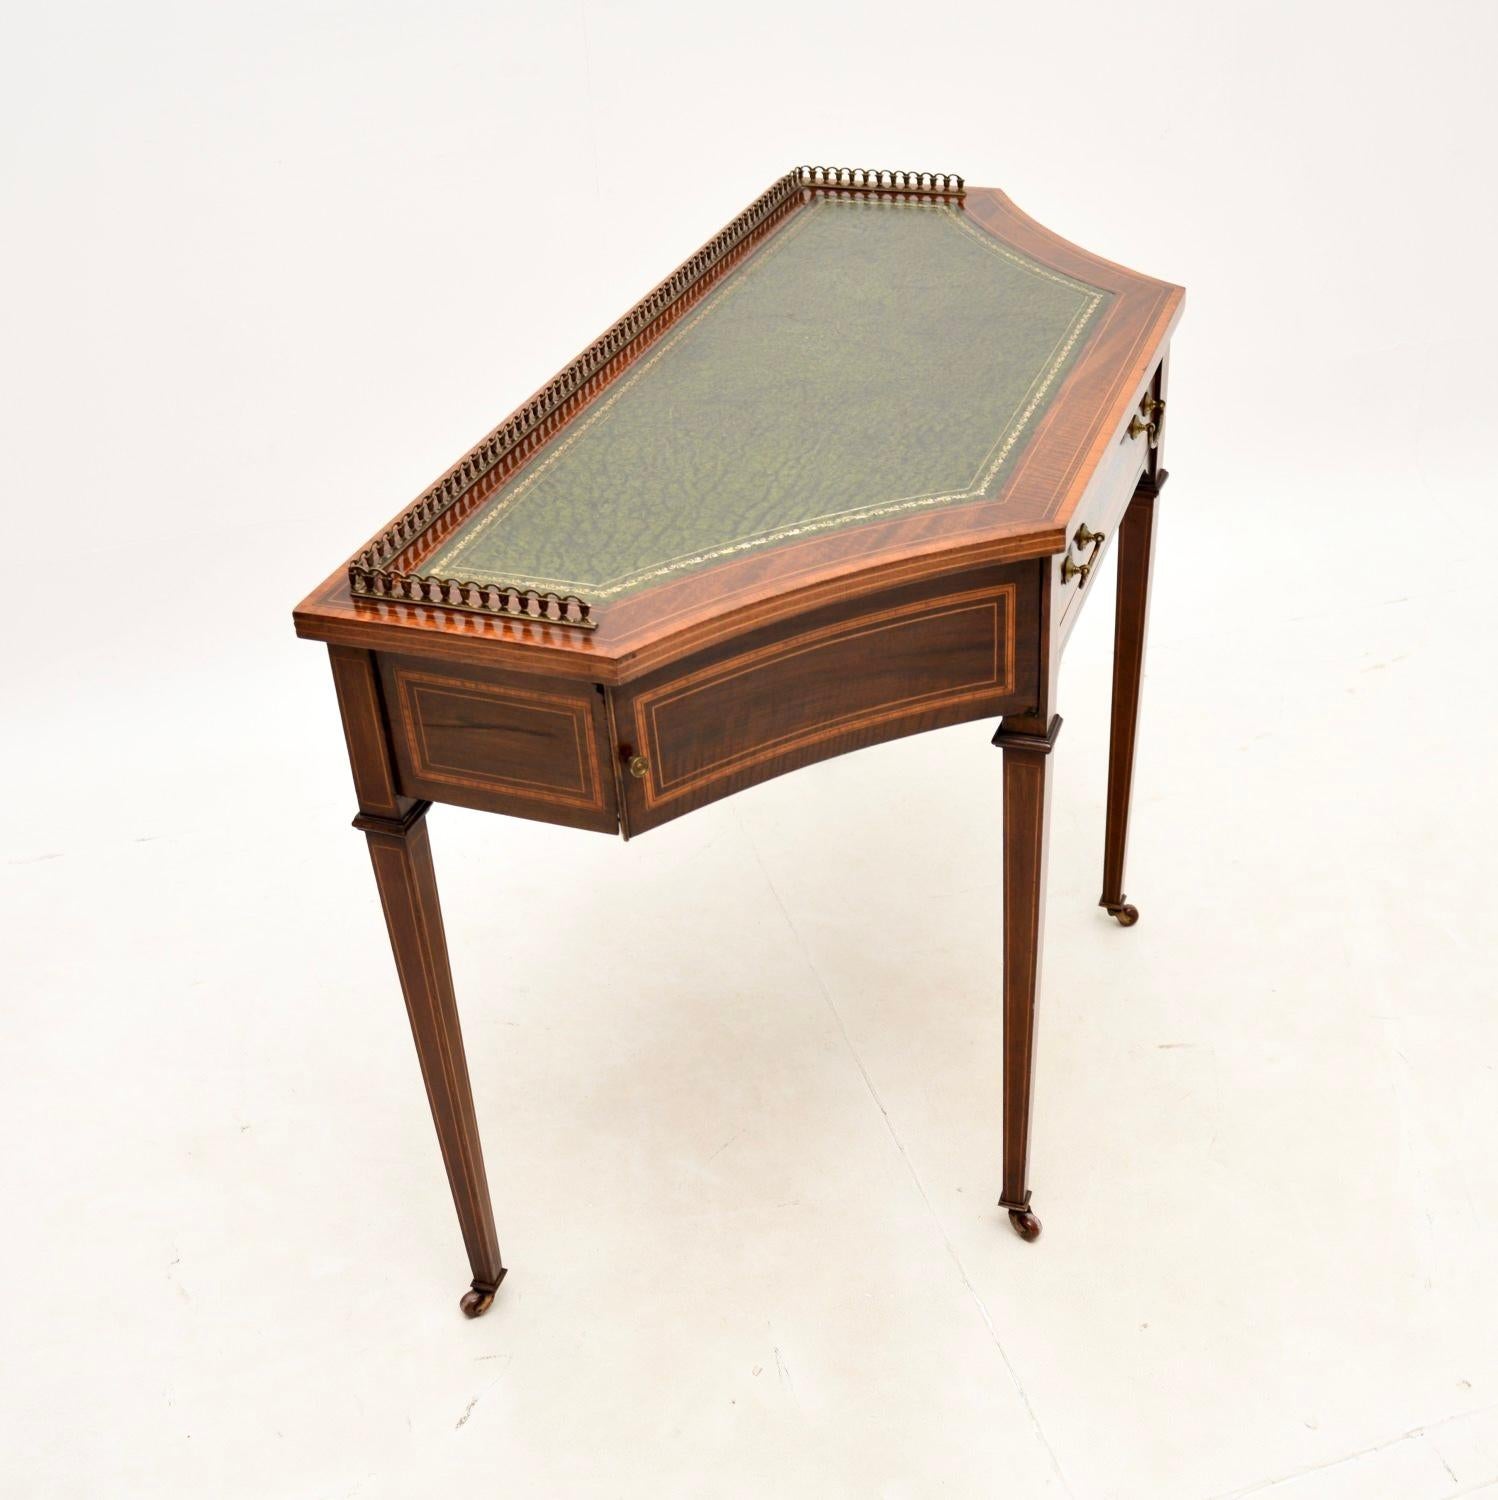 A wonderful antique Edwardian inlaid writing table / desk. This was made in England, it dates from the 1900-1910 period.

It has a fantastic design and is of superb quality. The break fronted top has a pierced brass gallery, it stands on tapered